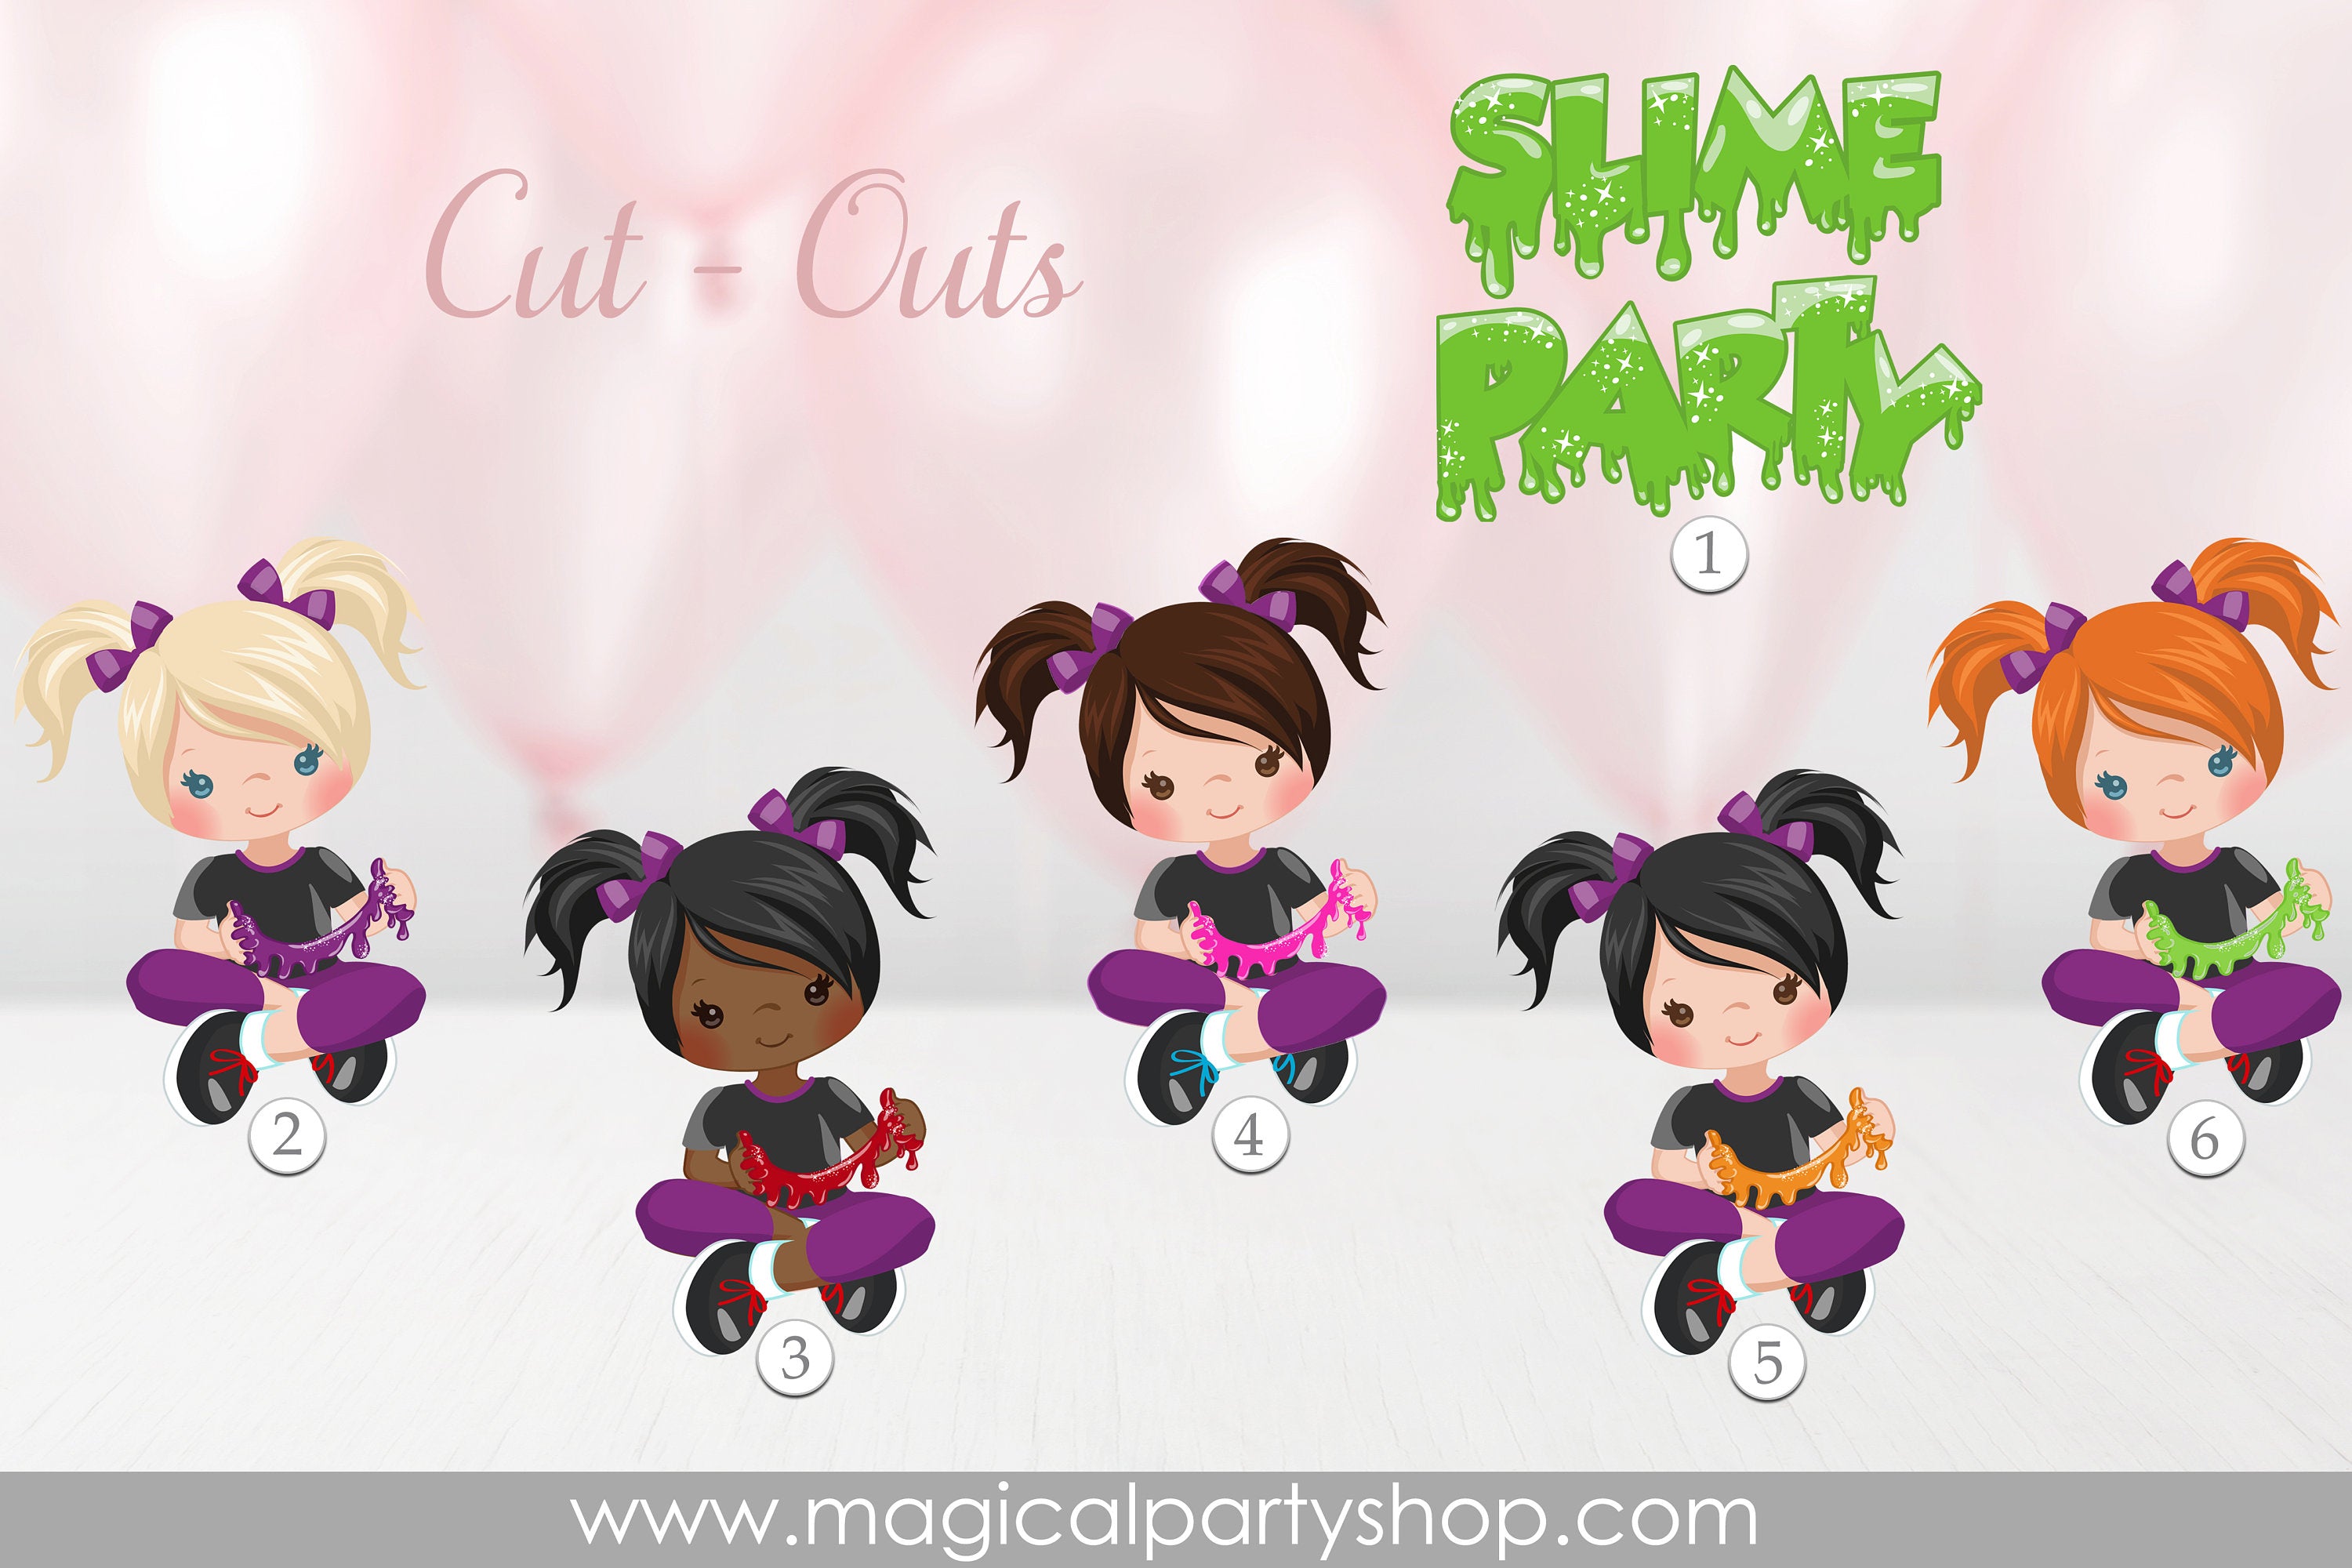 Slime Cupcake Toppers, Slime Centerpiece